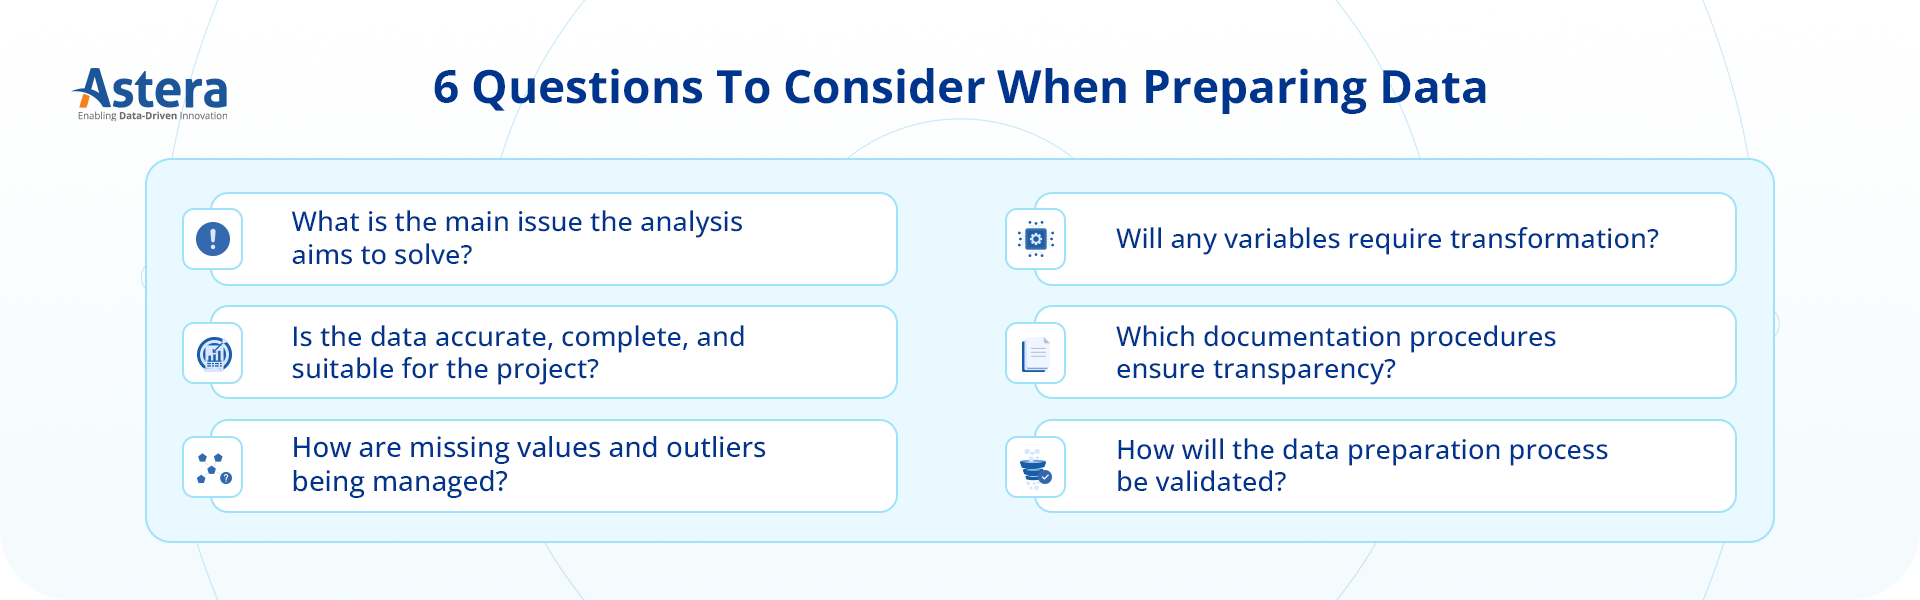 Important Questions to Ask When Preparing Data